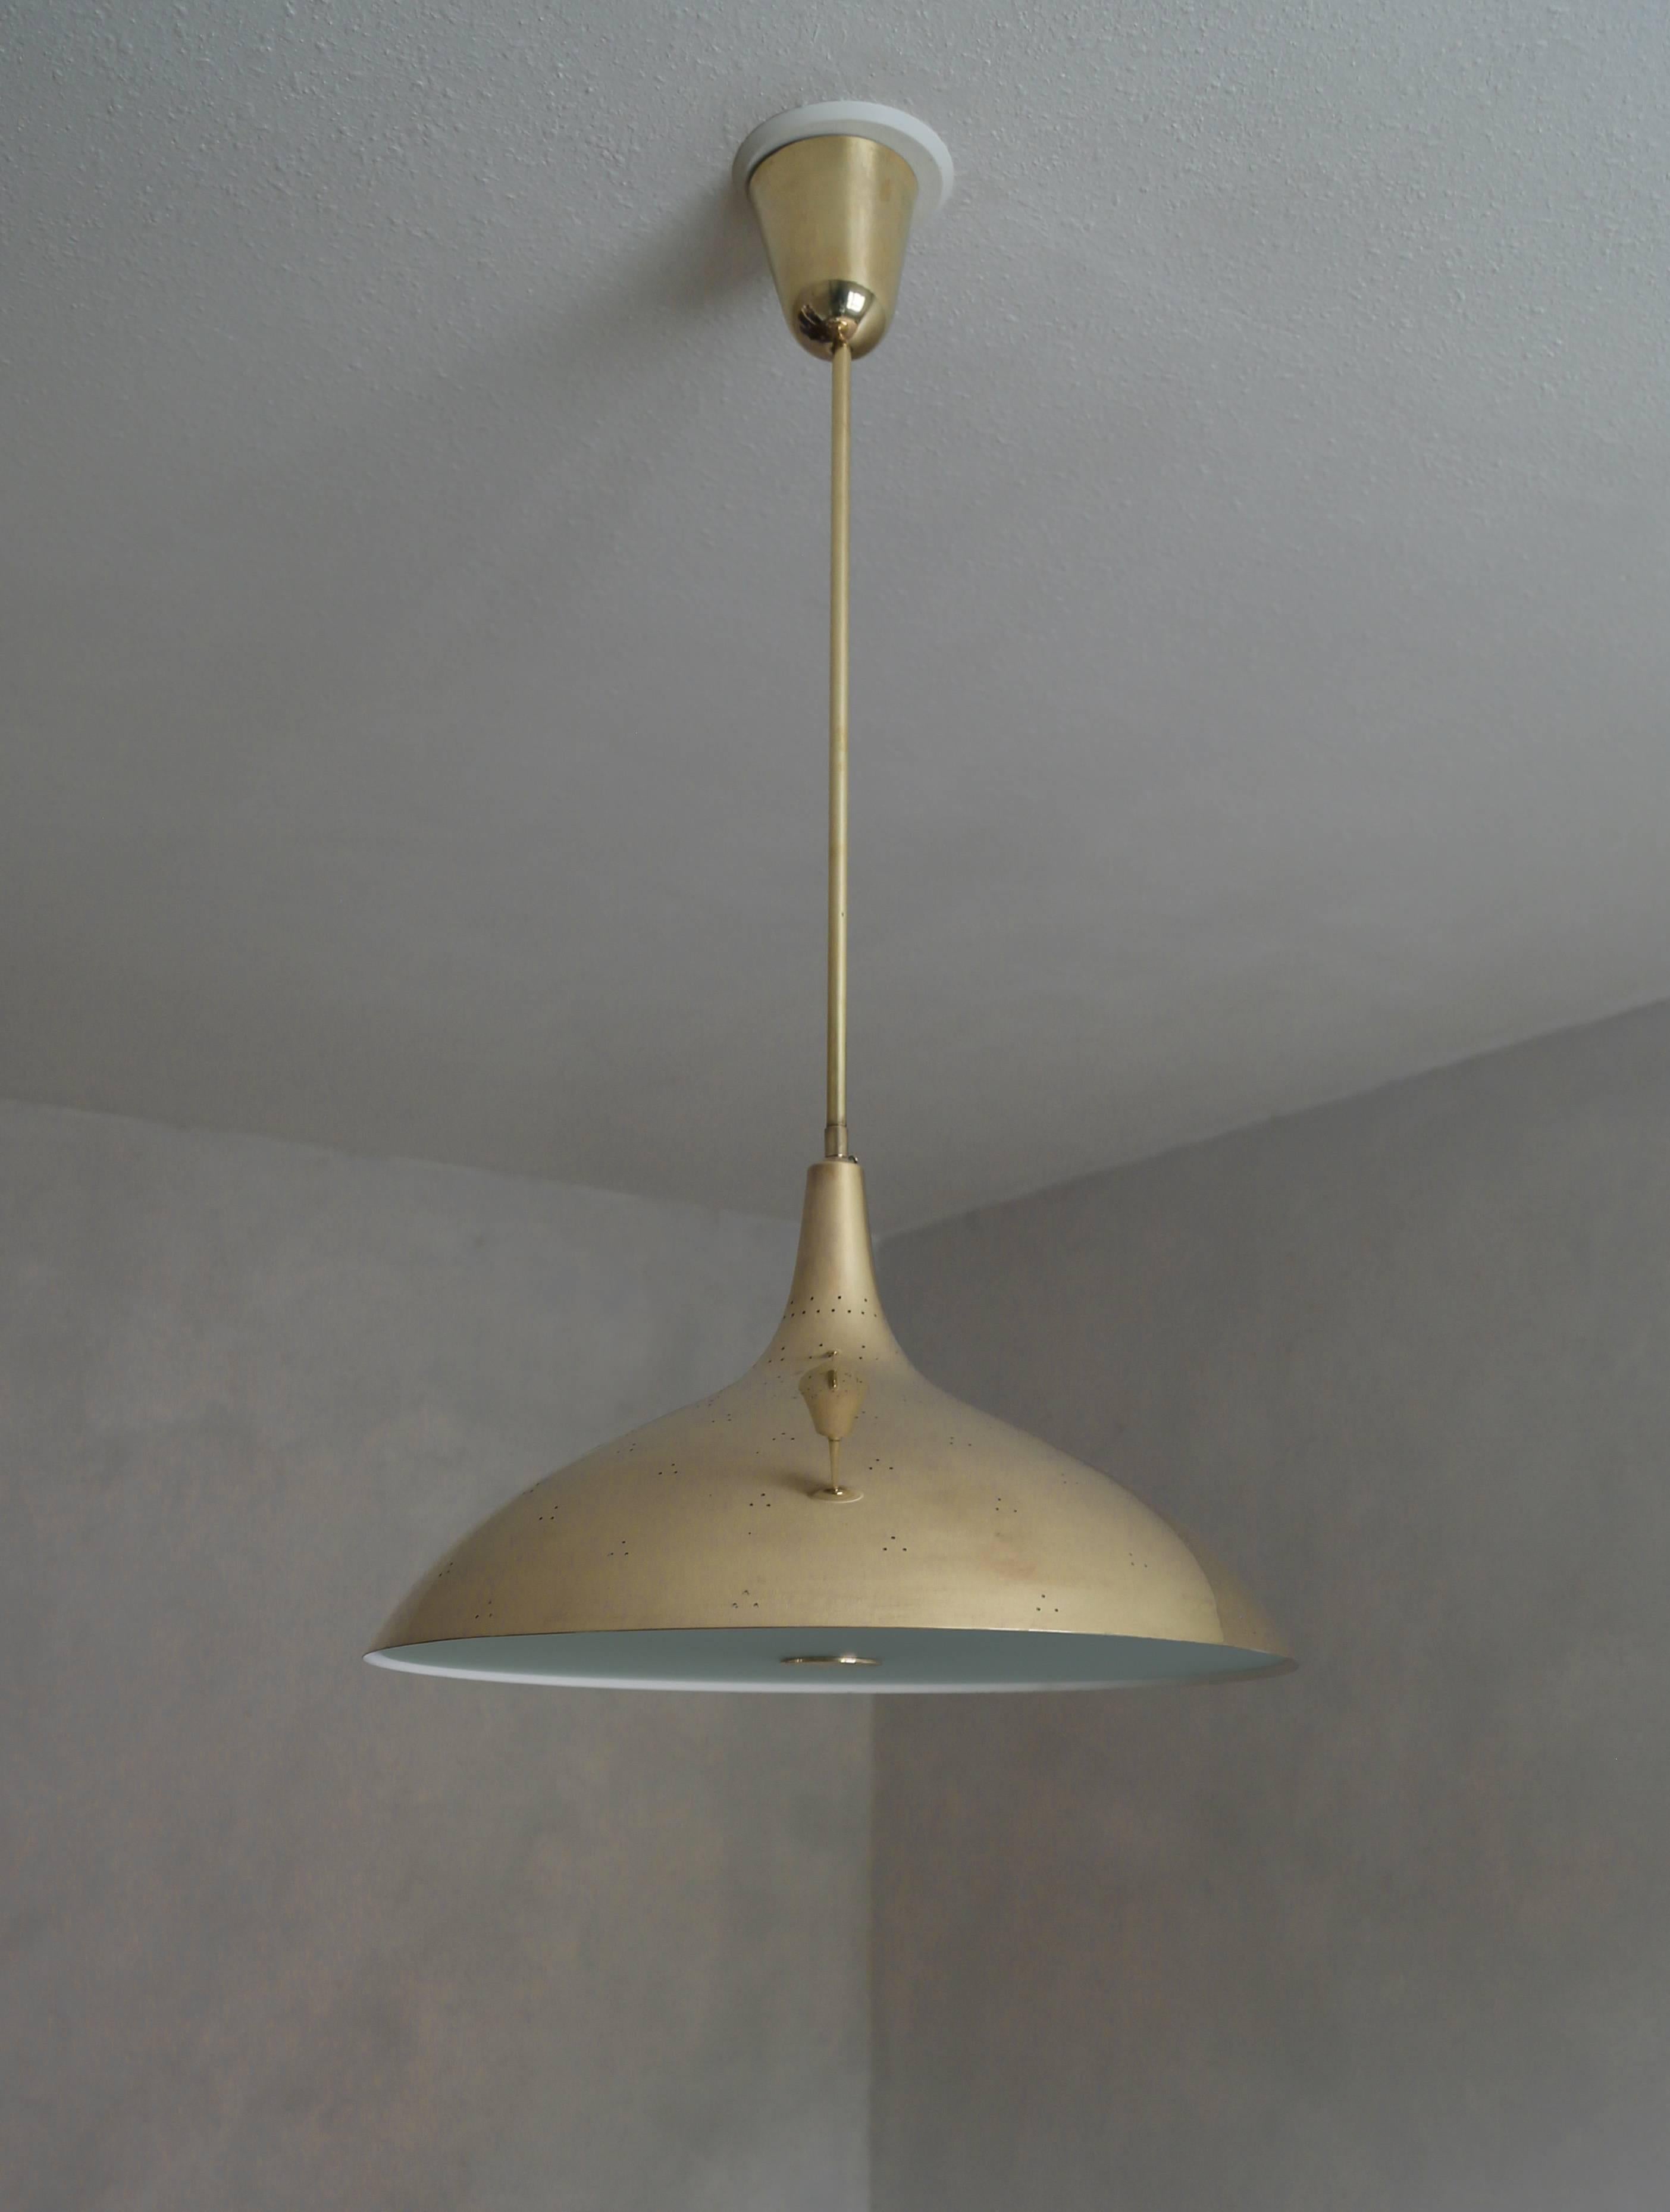 Finnish Paavo Tynell Ceiling Light, Model J1965 by Taito, 1940s